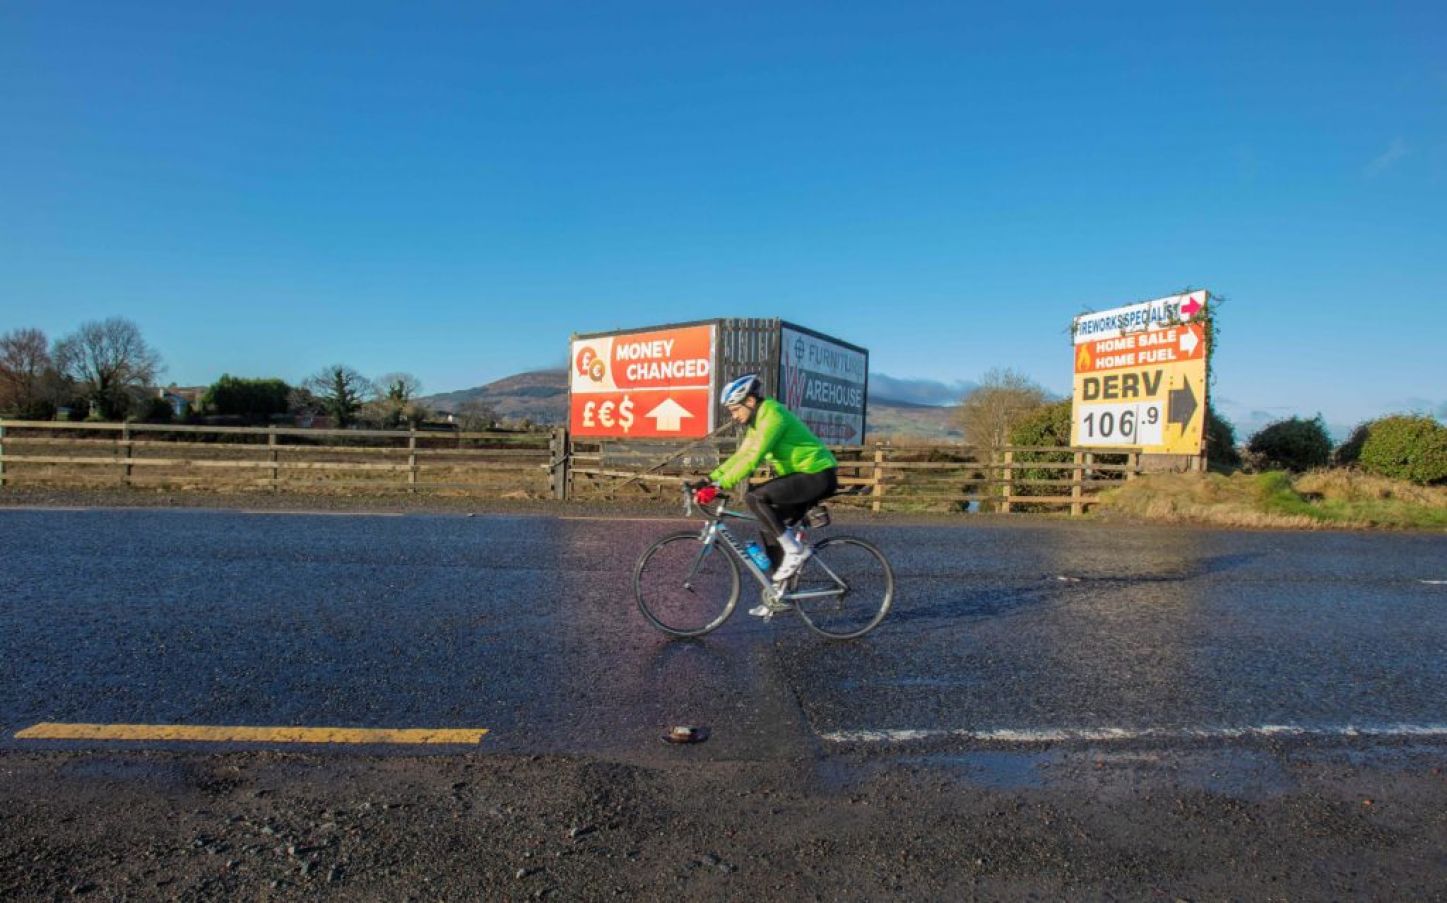 A Cyclist Crosses The Border Into Co Louth On January 1St. The Year Began With The Uk Formally Leaving The Eu Single Market And Customs Union. Photo: Paul Faith/Afp Via Getty